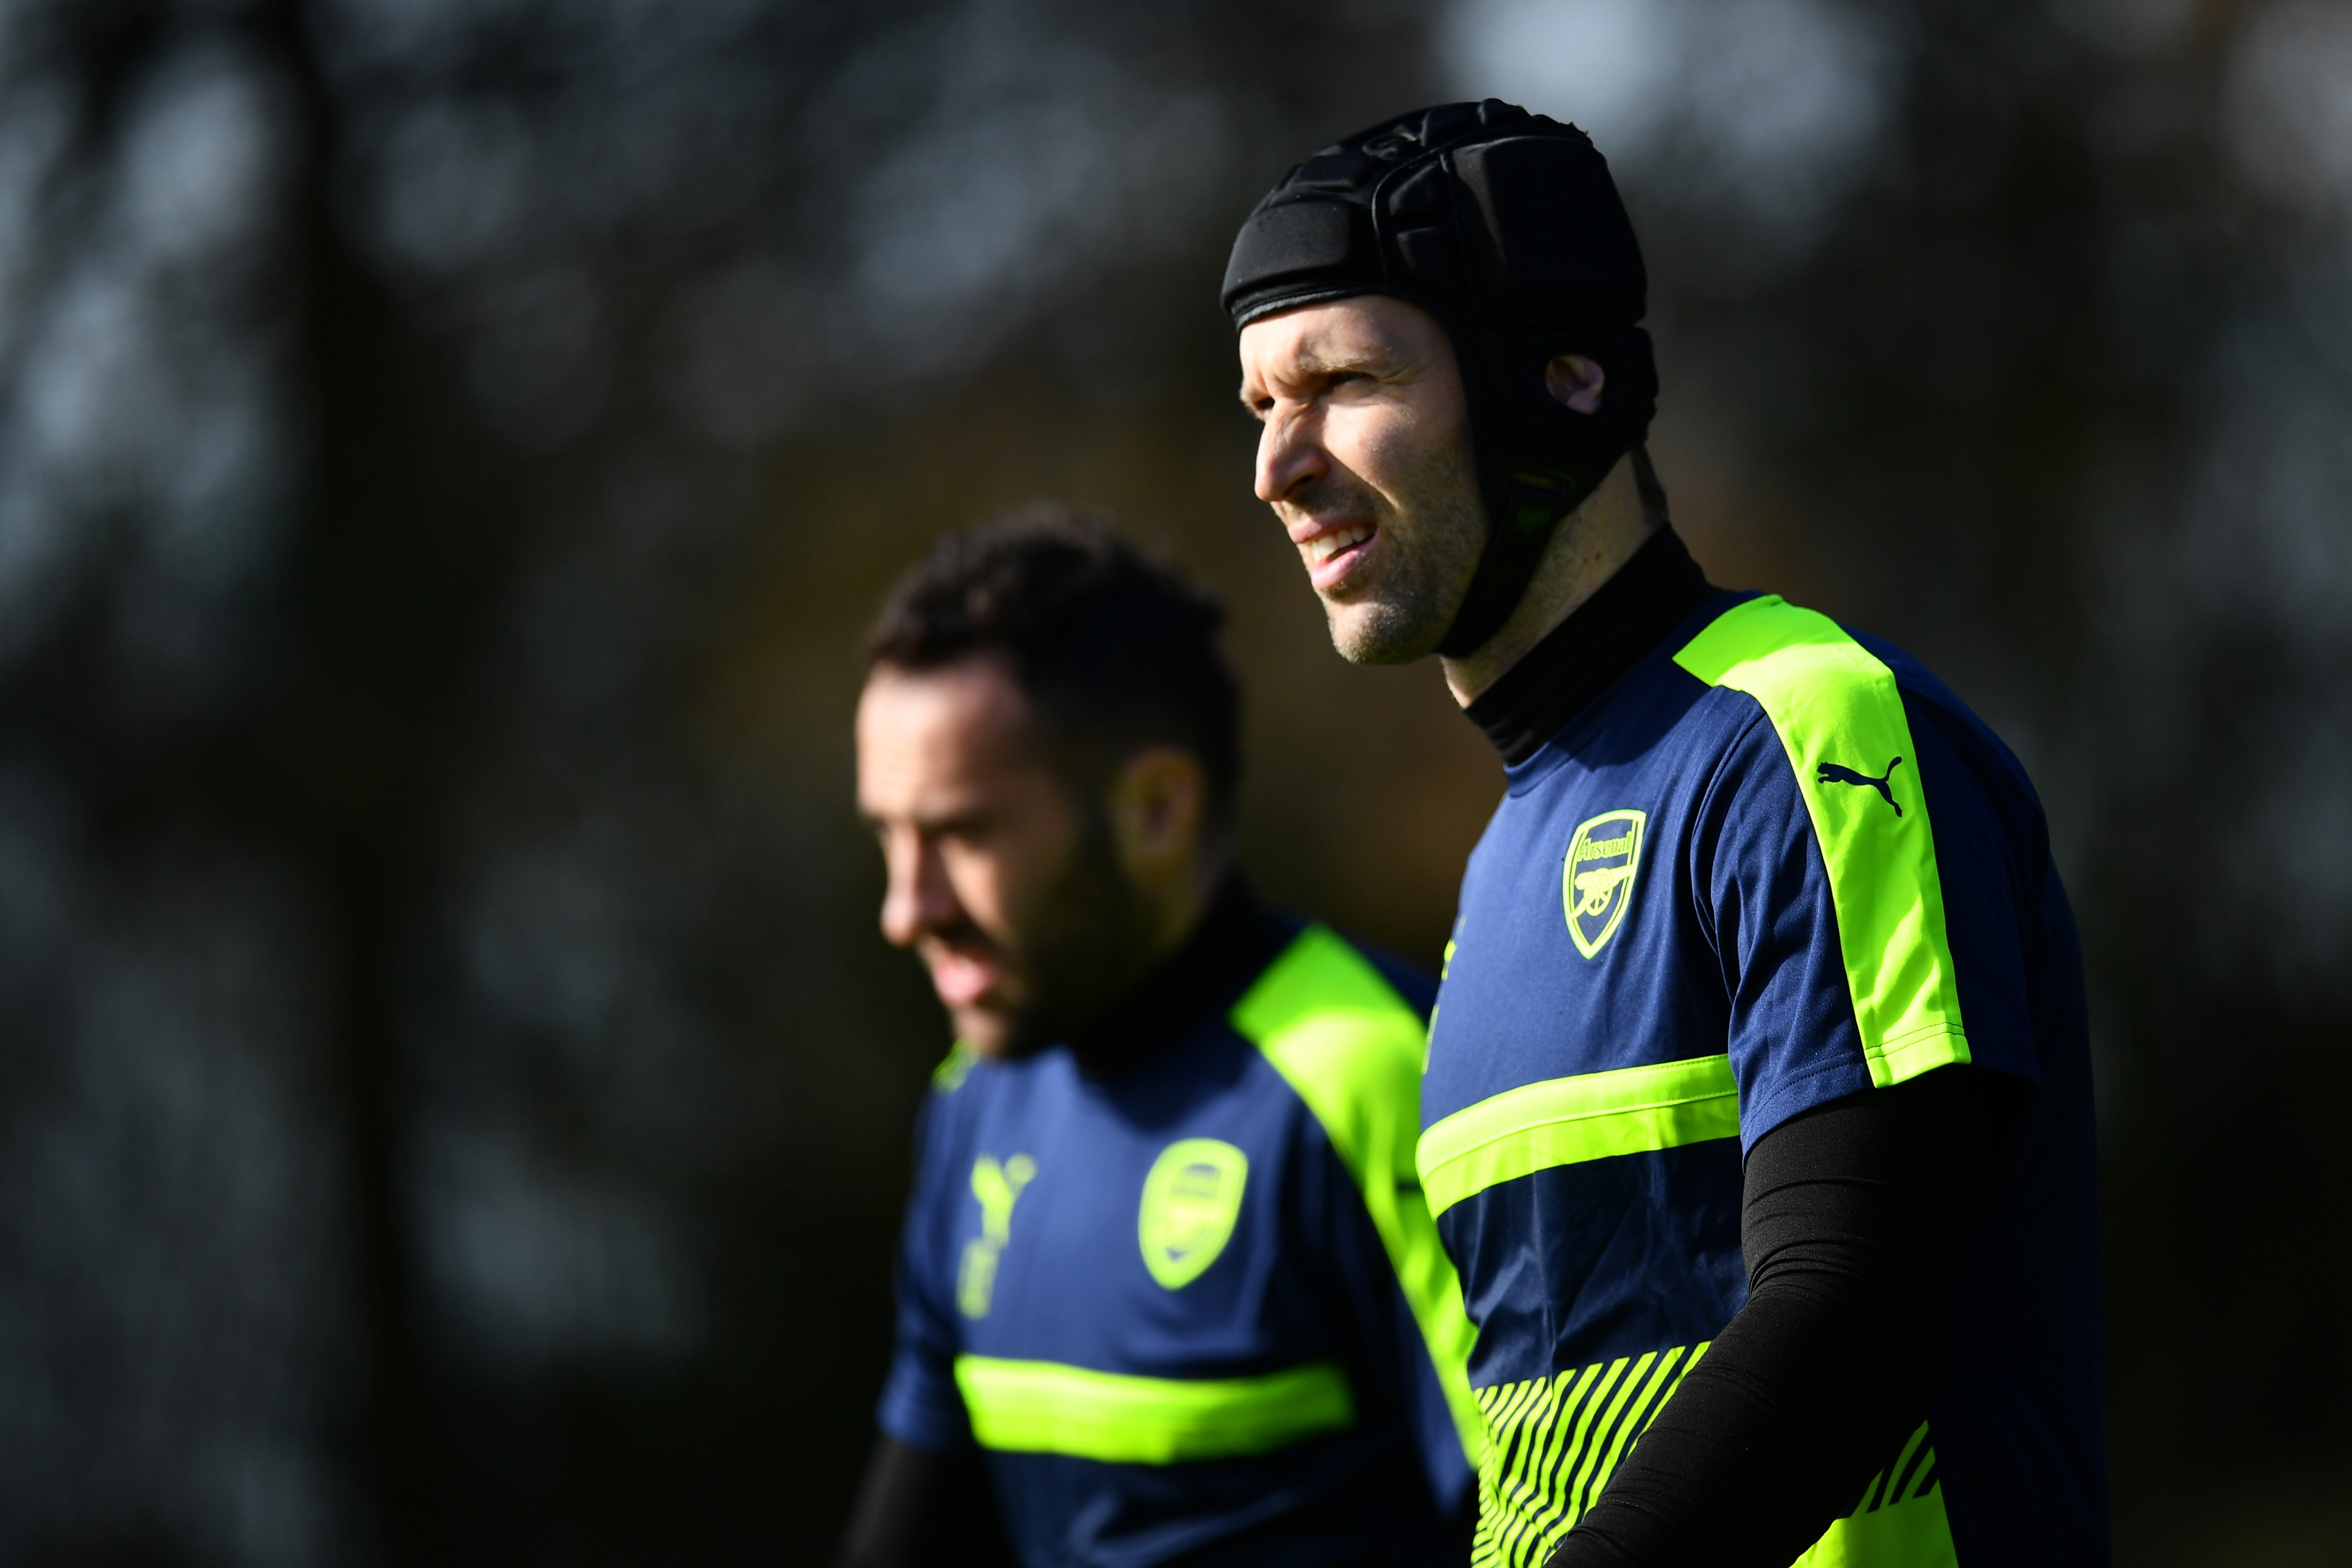 ST ALBANS, ENGLAND - MARCH 06: (R-L) Arsenal goalkeepers Petr Cech and David Ospina arrive prior to the Arsenal traing session at London Colney on March 6, 2017 in St Albans, England. (Photo by Dan Mullan/Getty Images)